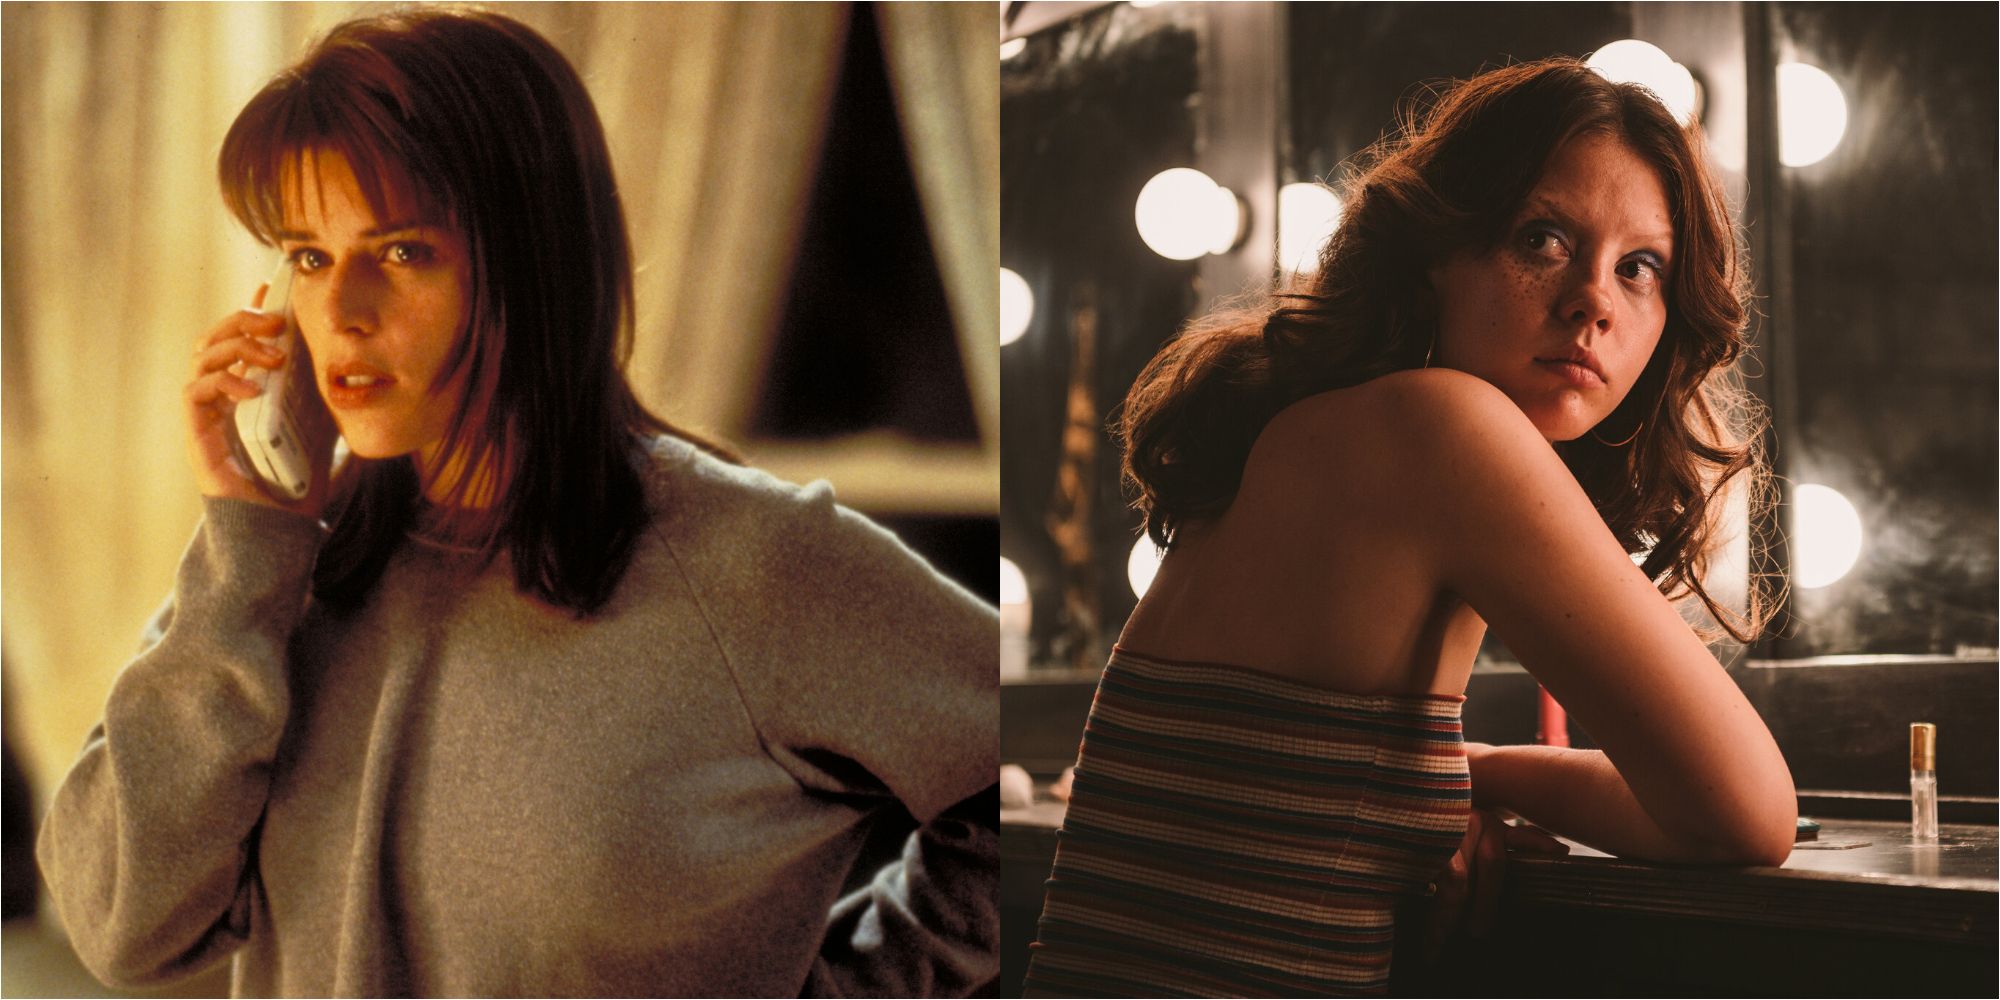 Split image showing Sydney in Scream and Maxine in X.